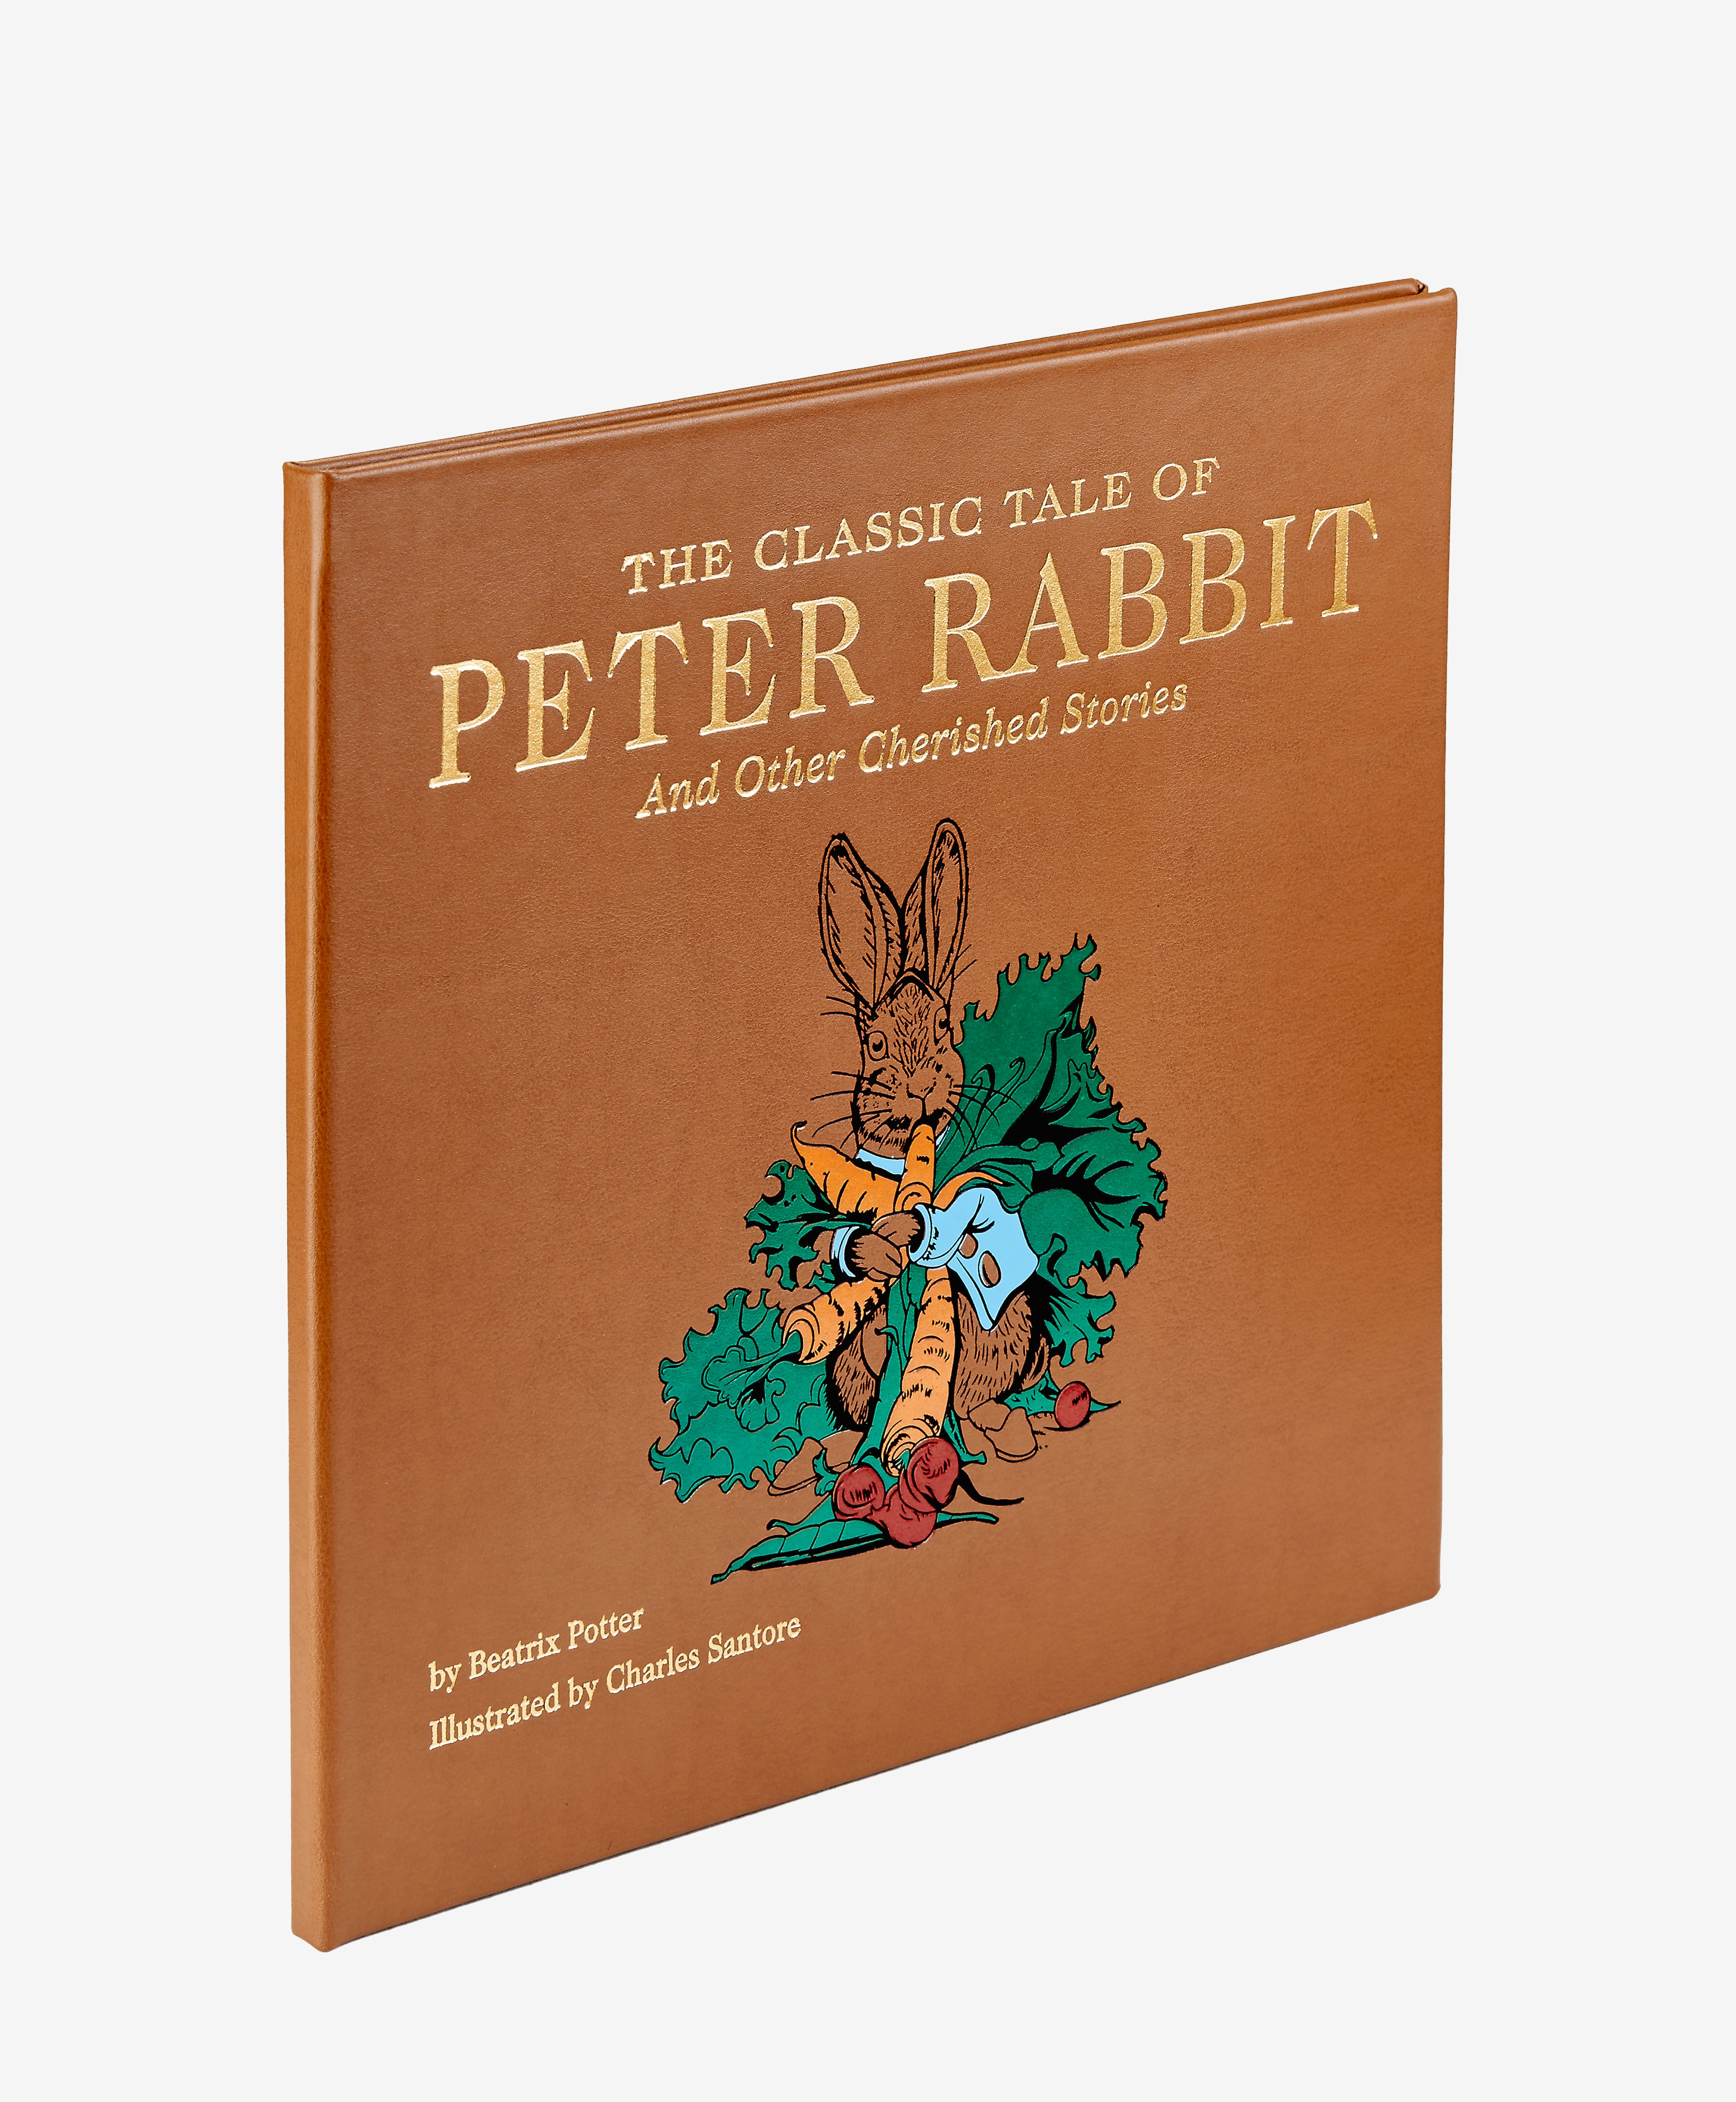 Peter Rabbit' review: You'll cotton to this tale – Twin Cities